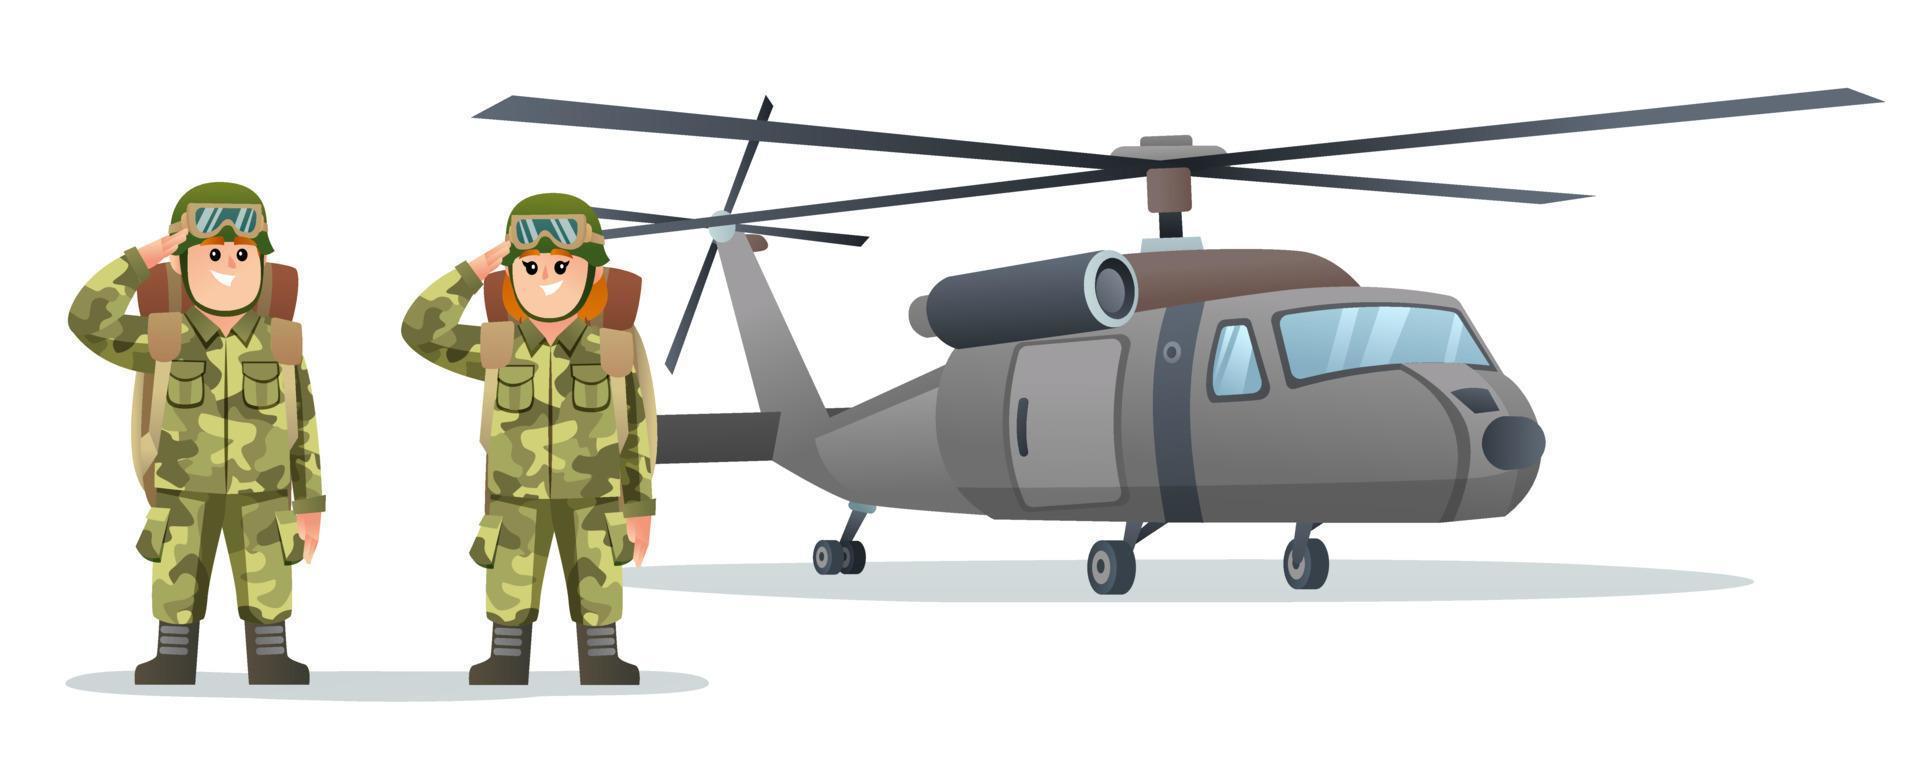 Cute little boy and girl army soldier carrying backpack characters with military helicopter cartoon illustration vector